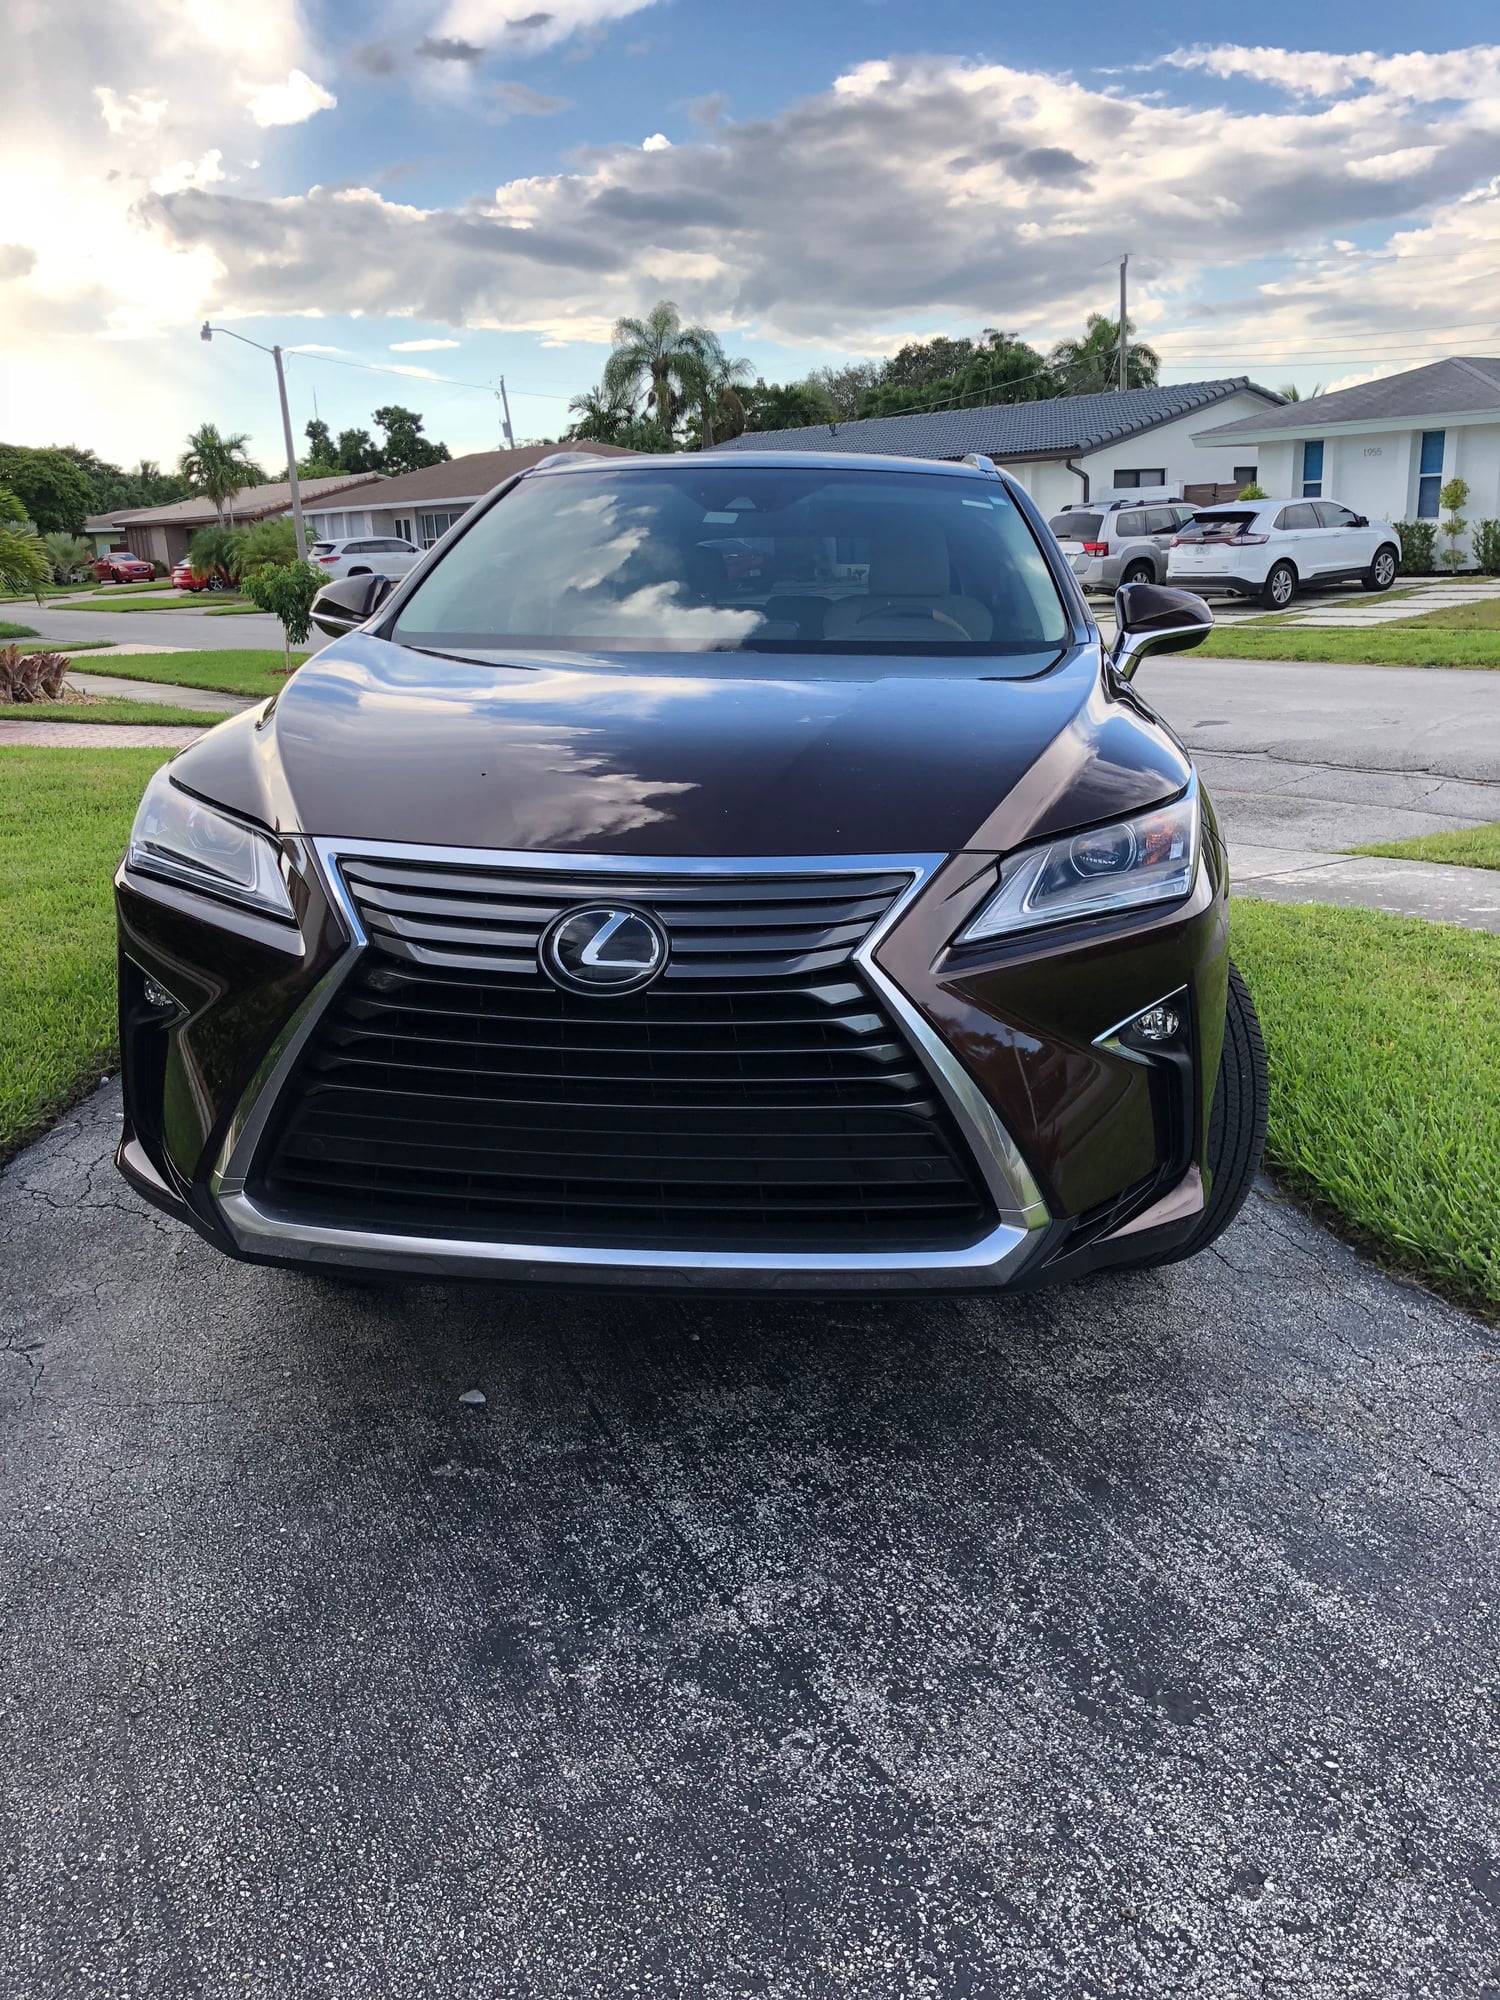 2017 Lexus RX350 - RX350 with 6000 miles.  Had it 5 months.  Perfect. - Used - VIN JTHBL5EF9E5133021 - 6,000 Miles - 6 cyl - 2WD - Automatic - SUV - Brown - Miami, FL 33179, United States